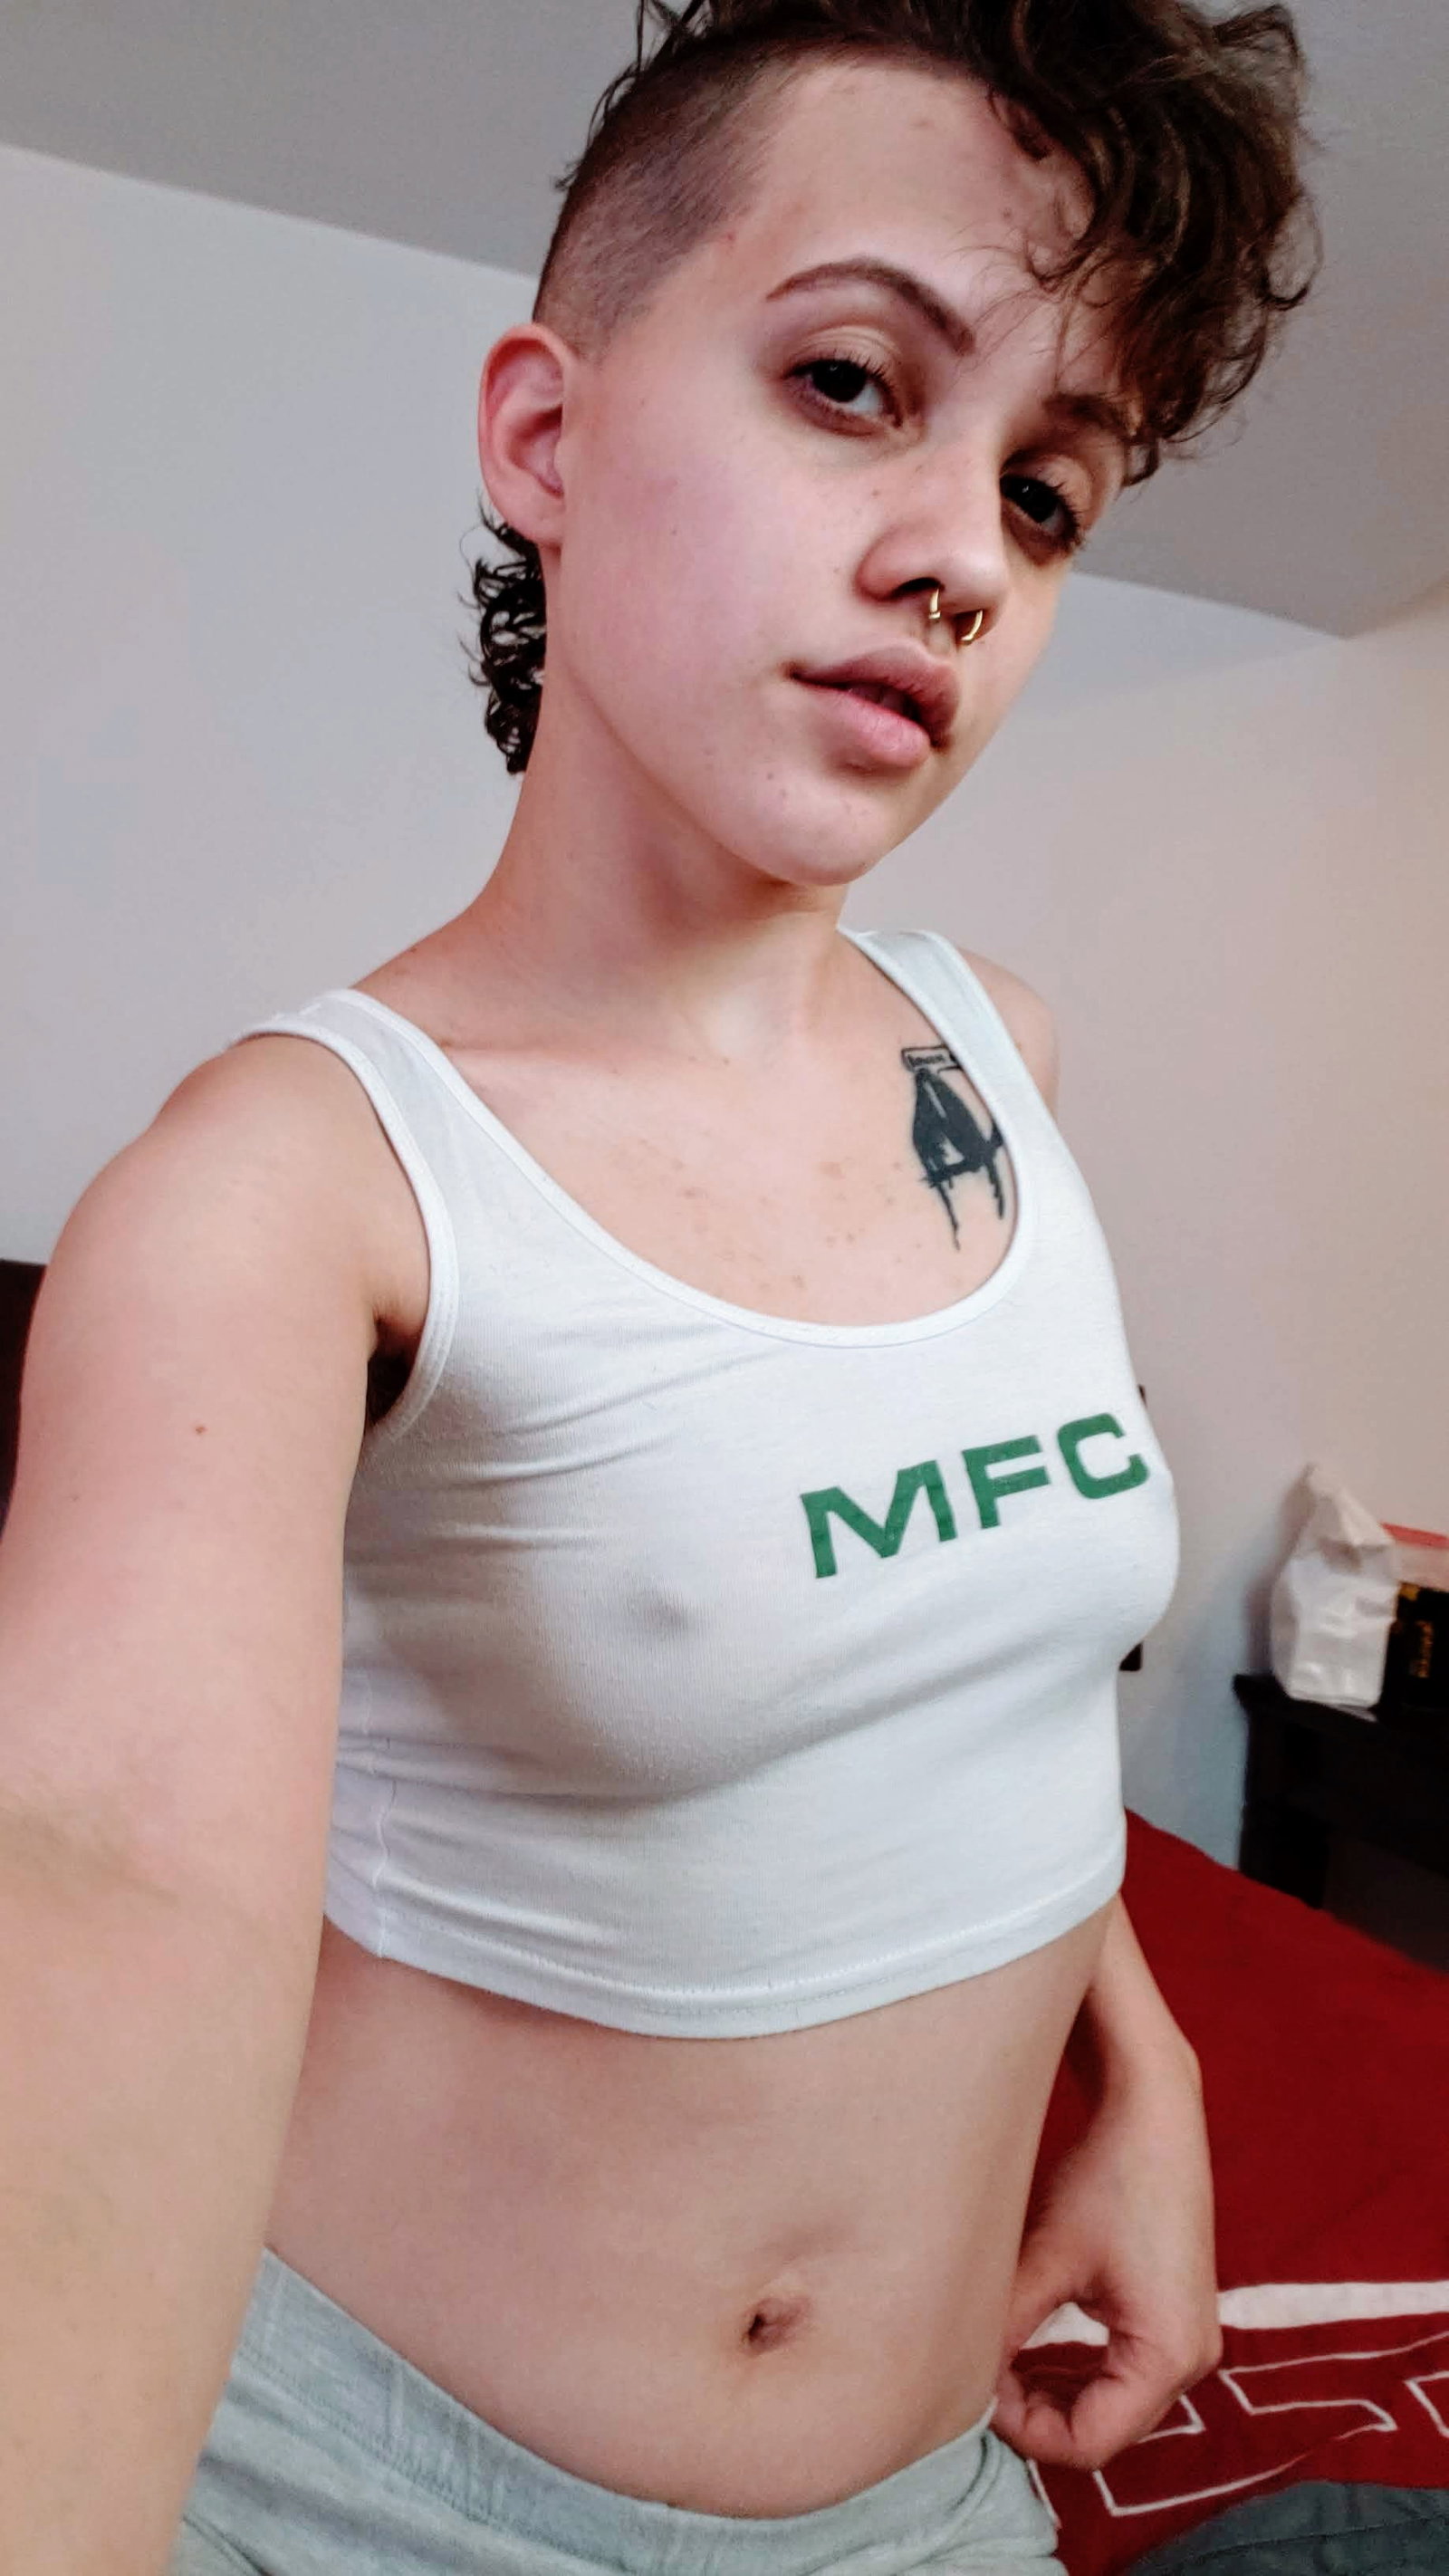 Watch the Photo by MxPraxisPhanes with the username @MxPraxisPhanes, who is a star user, posted on March 28, 2019. The post is about the topic Amateurs. and the text says 'I'm online now!
https://live.manyvids.com/stream/mxpraxisphanes/public'